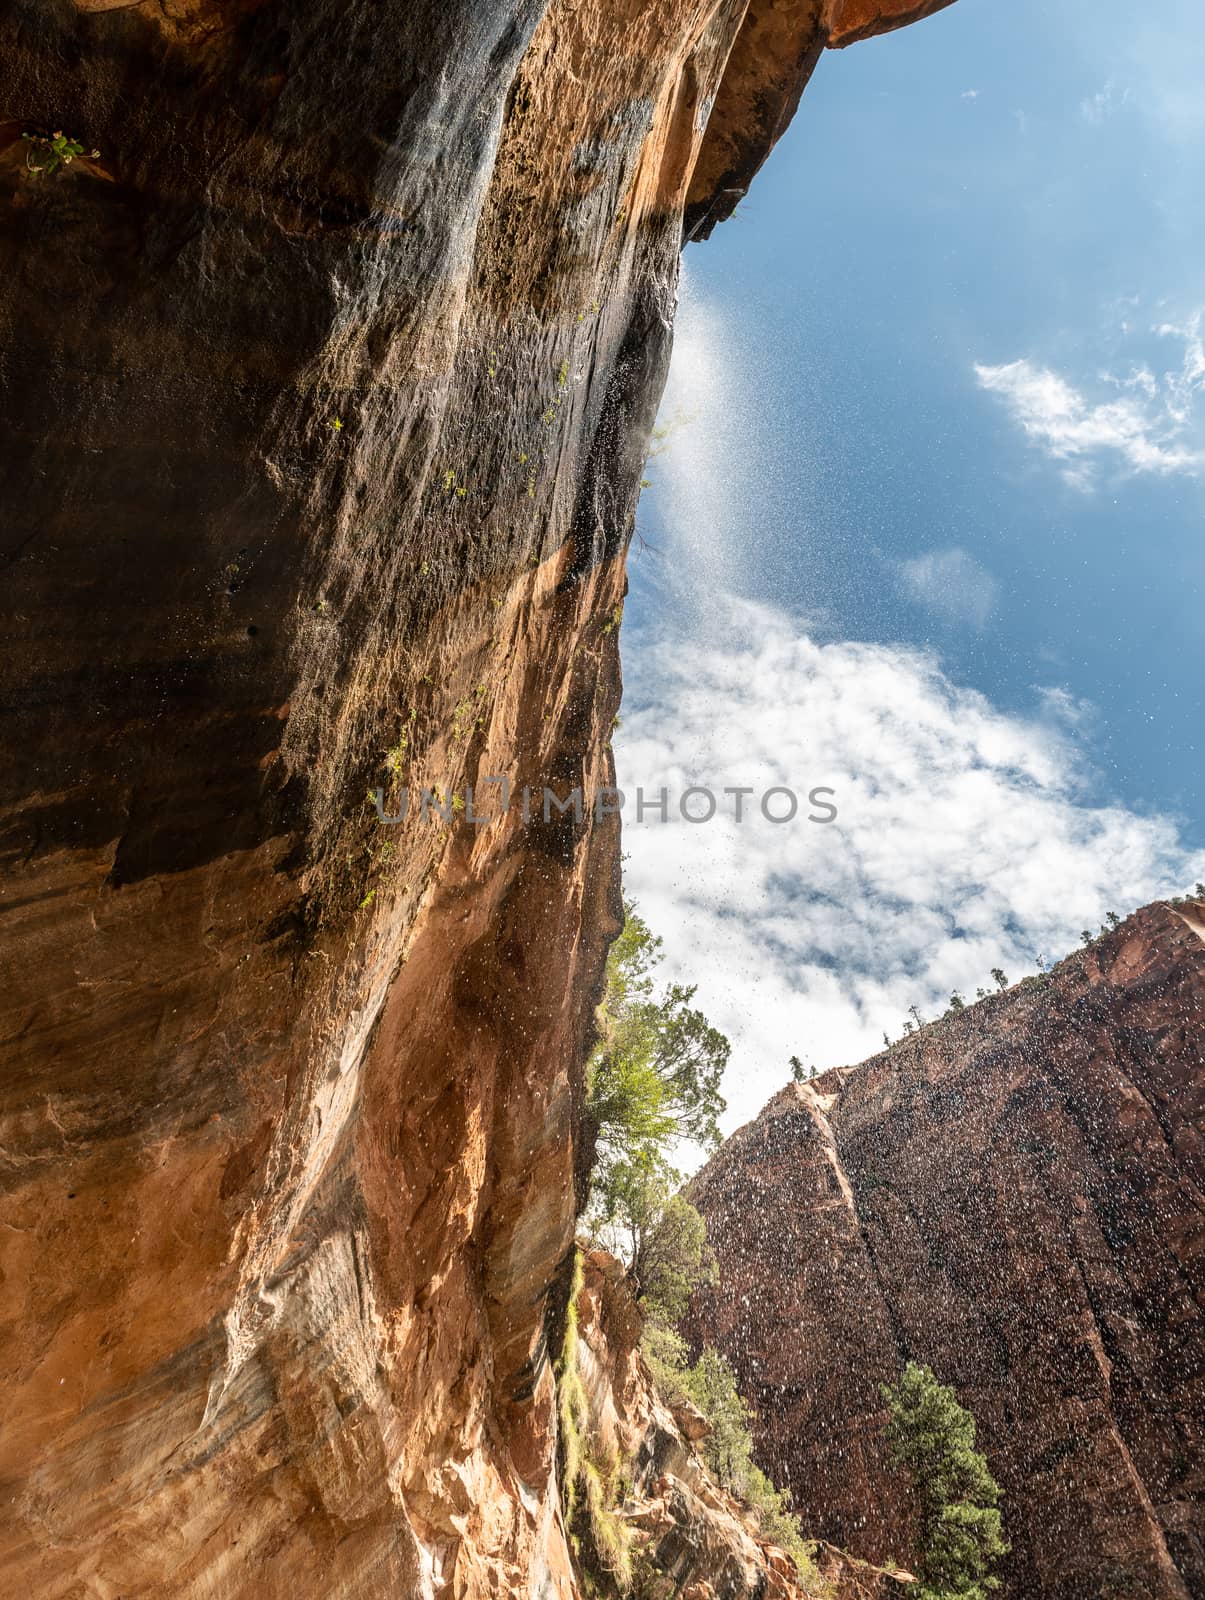 Emerald Pools Trail in Zion National Park, Utah by Njean